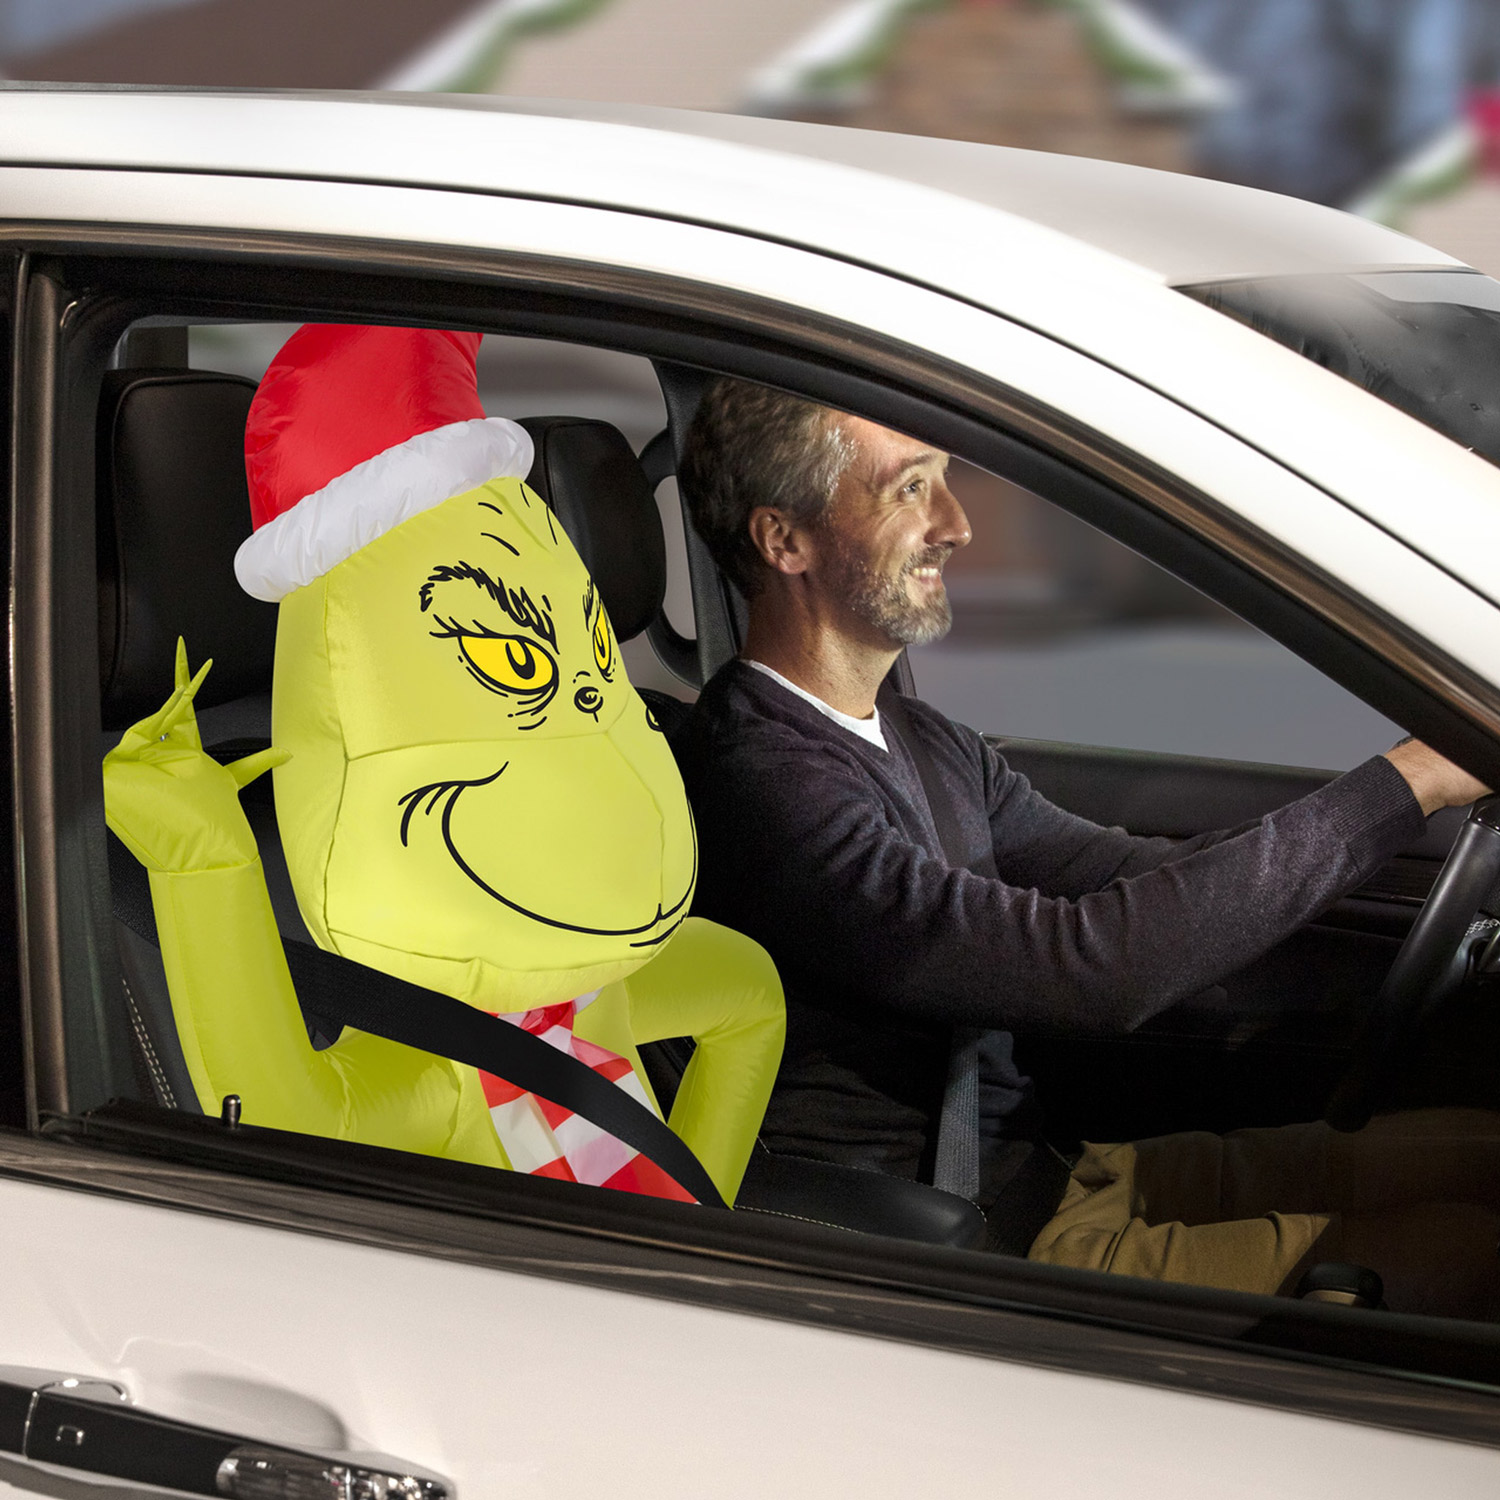 Inflatable Christmas Characters For The Car - Carbuddy passenger seat inflatable Christmas characters